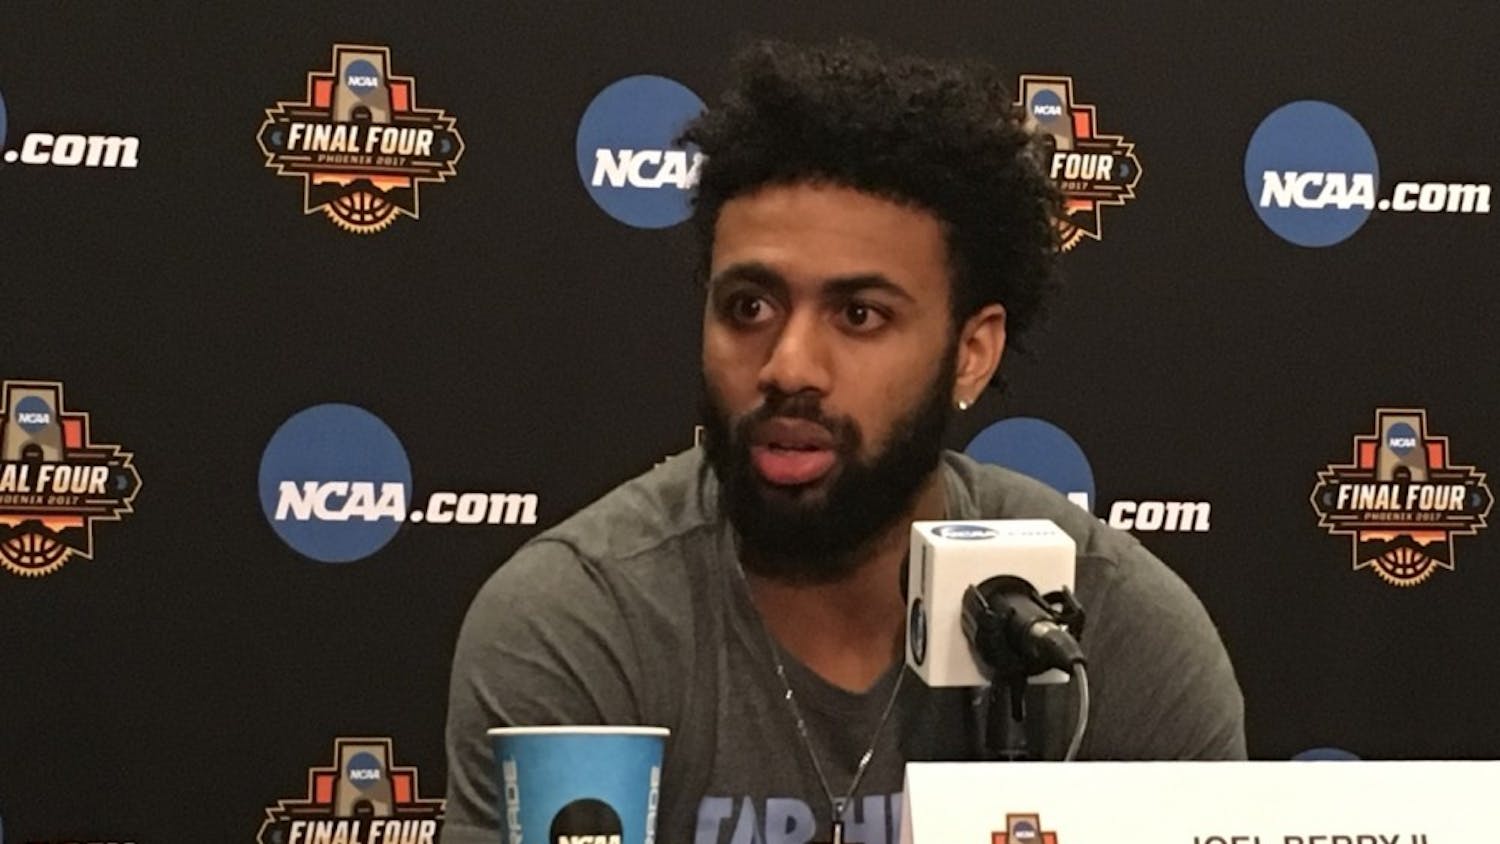 North Carolina guard Joel Berry speaks with the media inside University of Phoenix Stadium on Friday. Berry is expected to play in the Final Four against Oregon after injuring both his ankles earlier in the tournament.